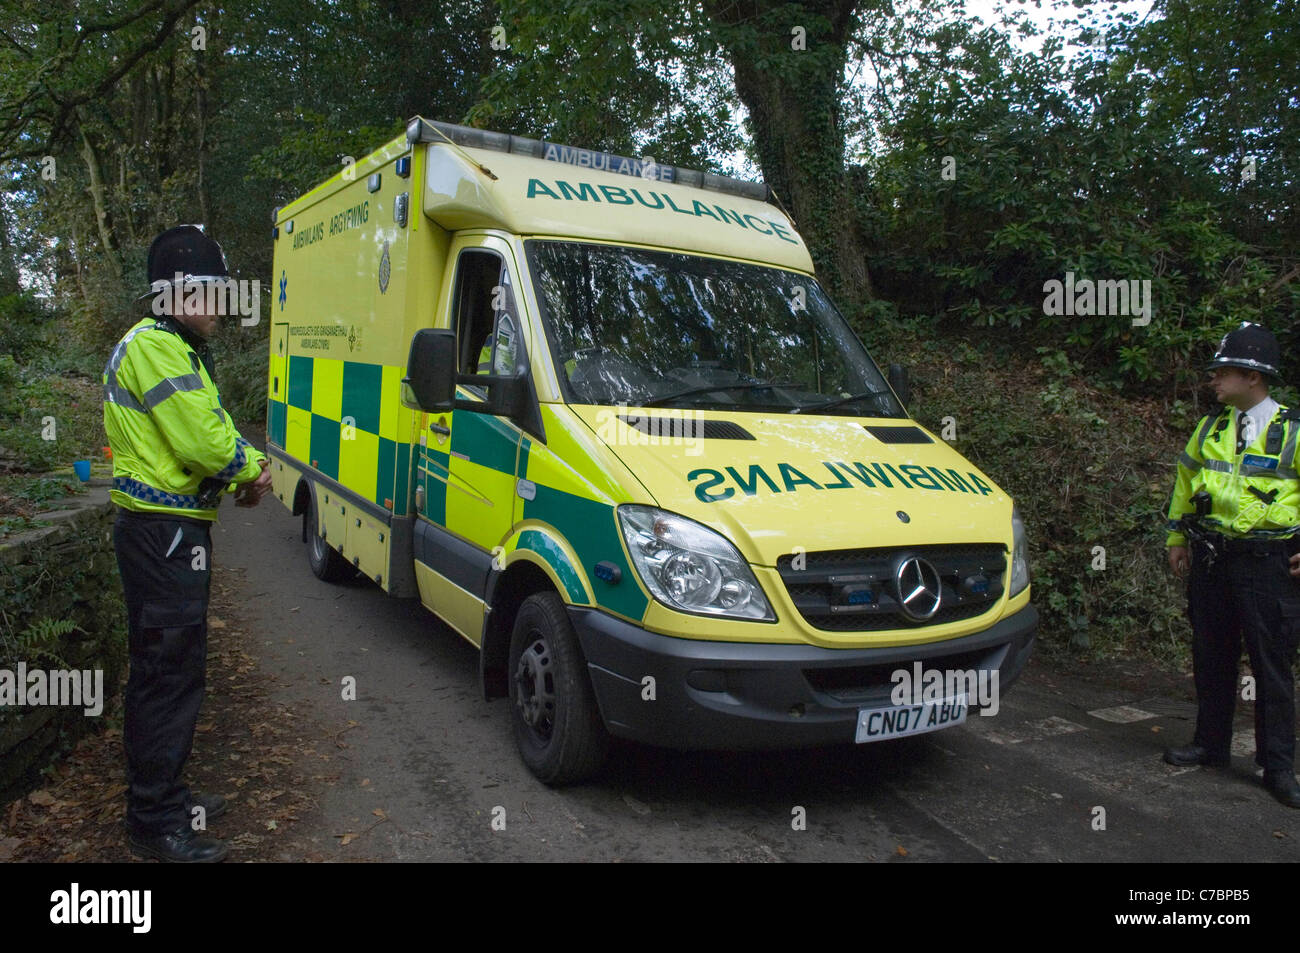 Ambulance leaving the scene during the Gleision Colliery miners rescue attempt operation near Cilybebyll, Pontardawe, South Wales, UK. Stock Photo